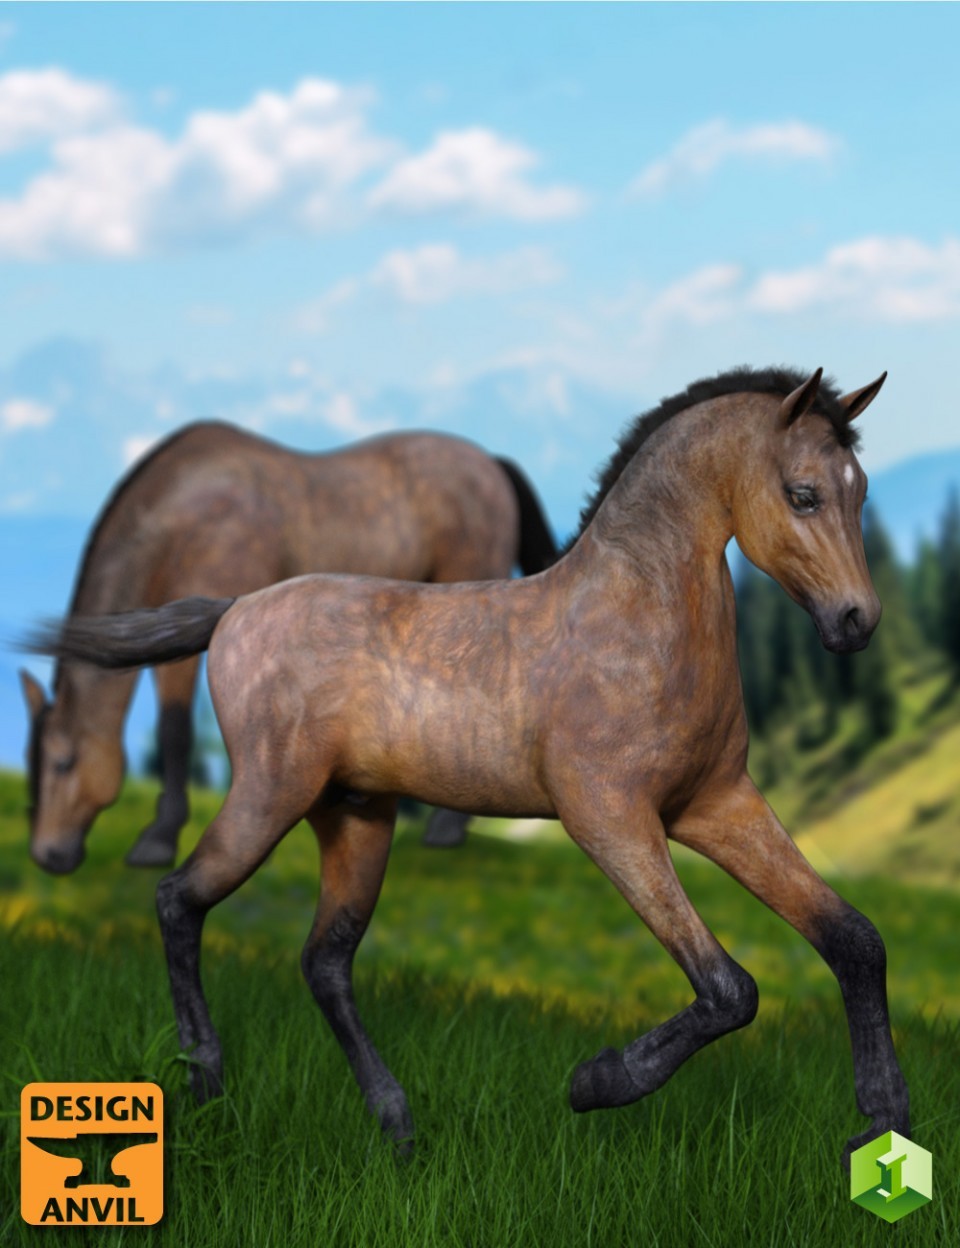 DA Foal and Poses for Daz Horse 2 马驹和姿势-Da Foal和Daz Horse的姿势2马驹和姿势